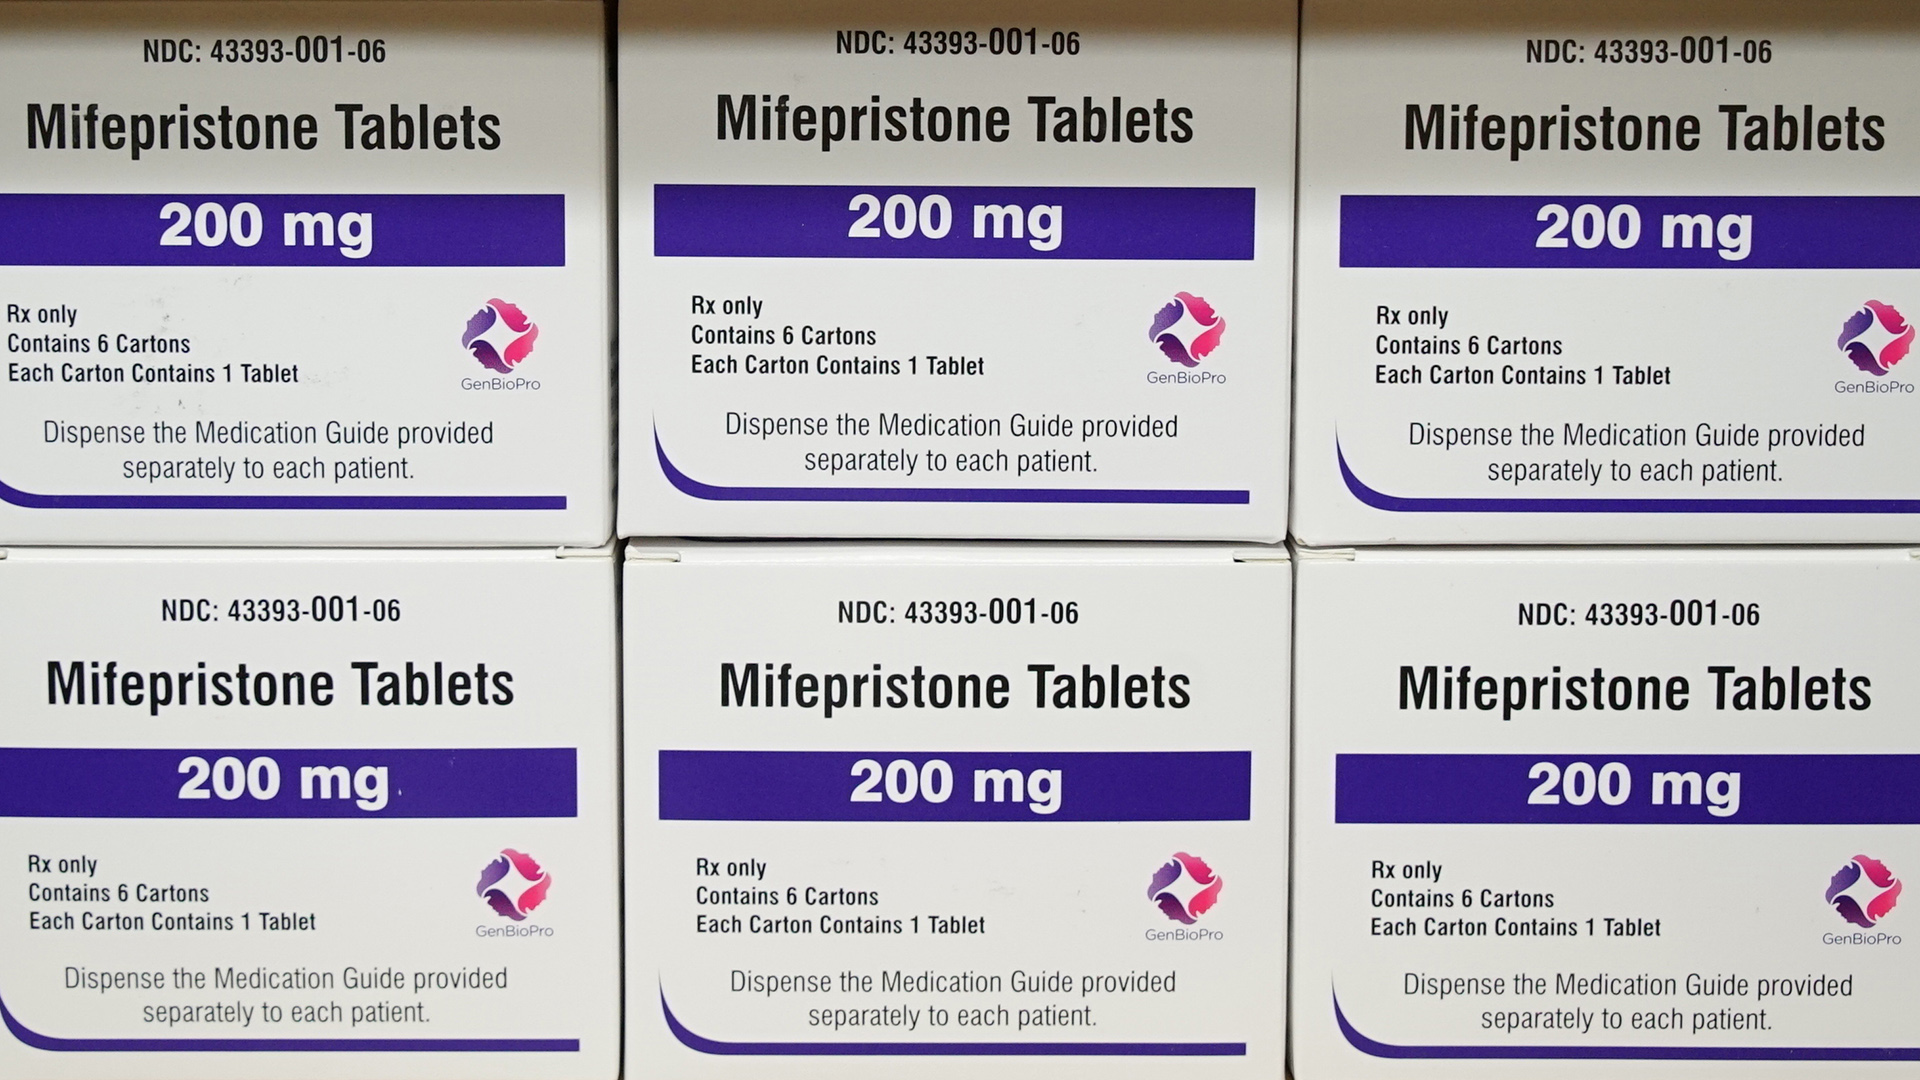 Six cardboard medication boxes with the labels "Mifepristone Tables" and "200 mg" are stacked in two rows of three.